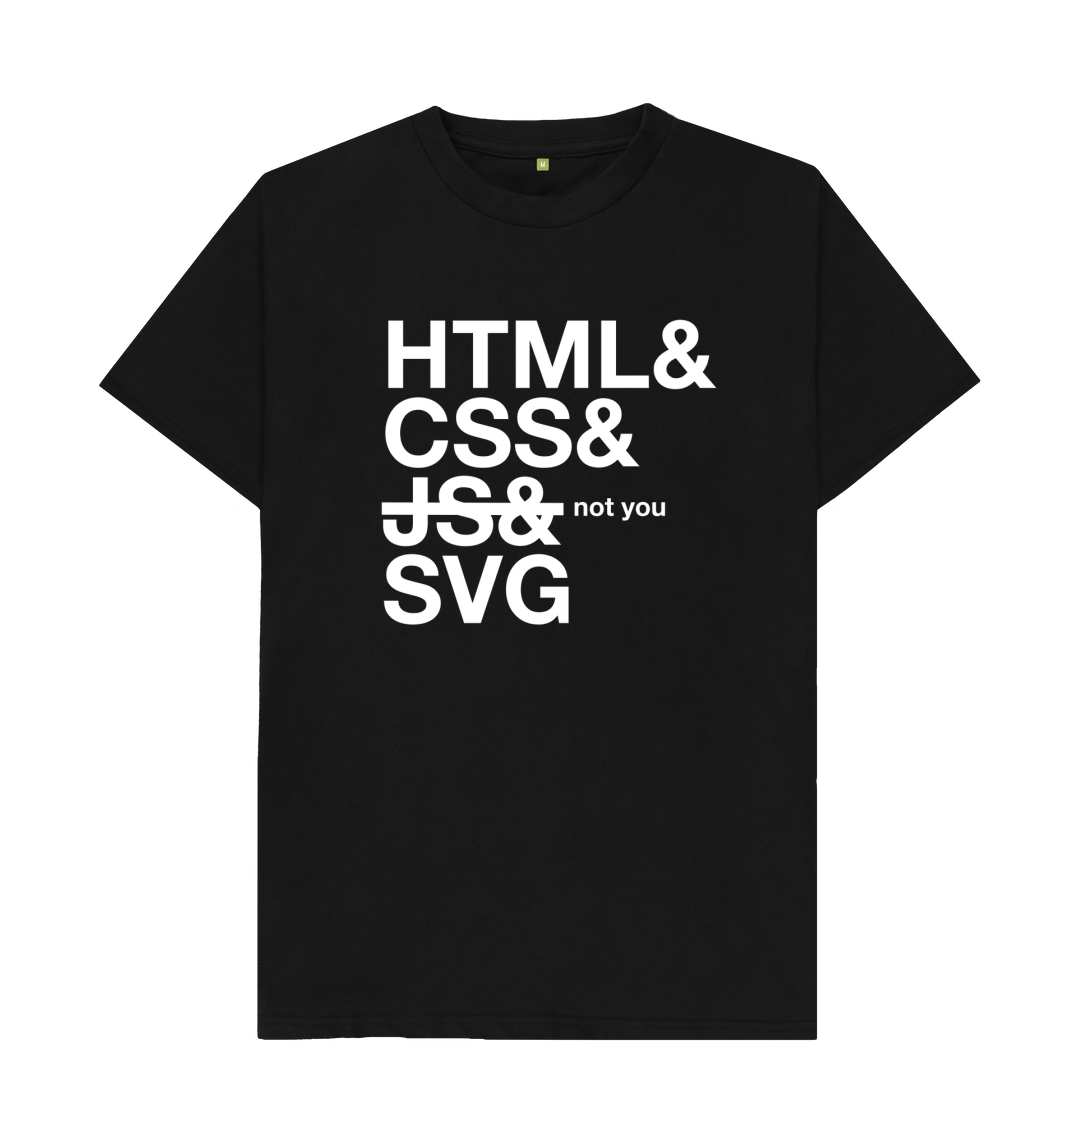 (Web technologies listed in Helvetica font, with JavaScript crossed out and marked \